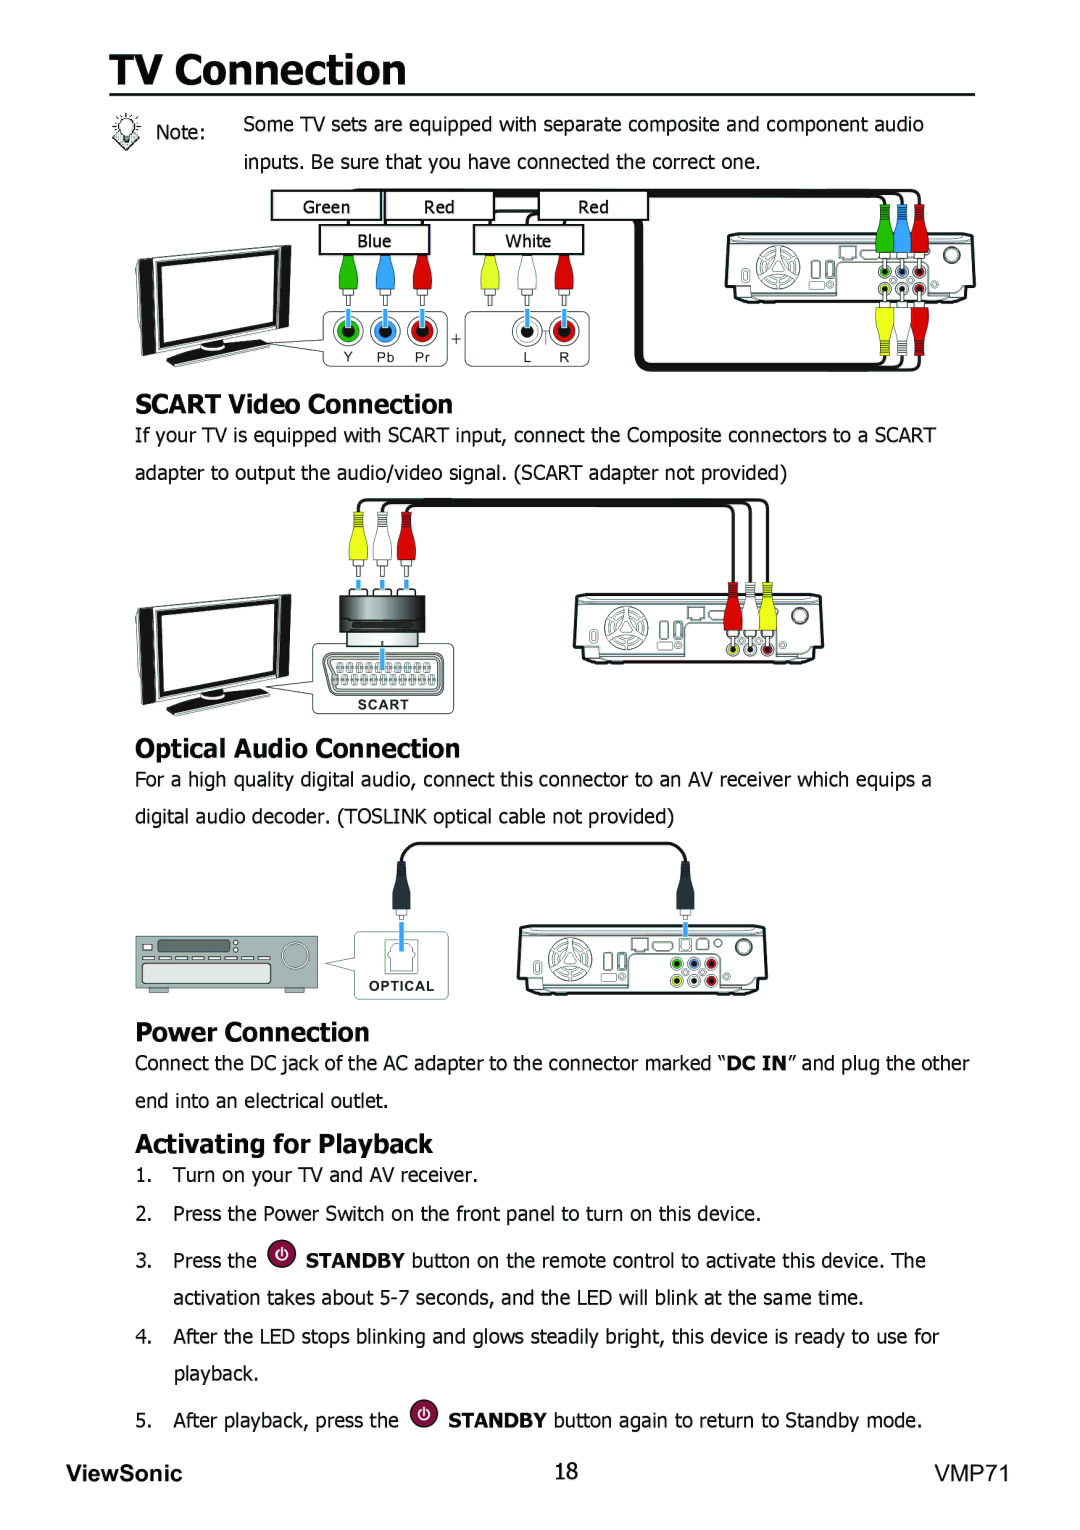 ViewSonic VMP71 manual Scart Video Connection, Optical Audio Connection, Power Connection, Activating for Playback 